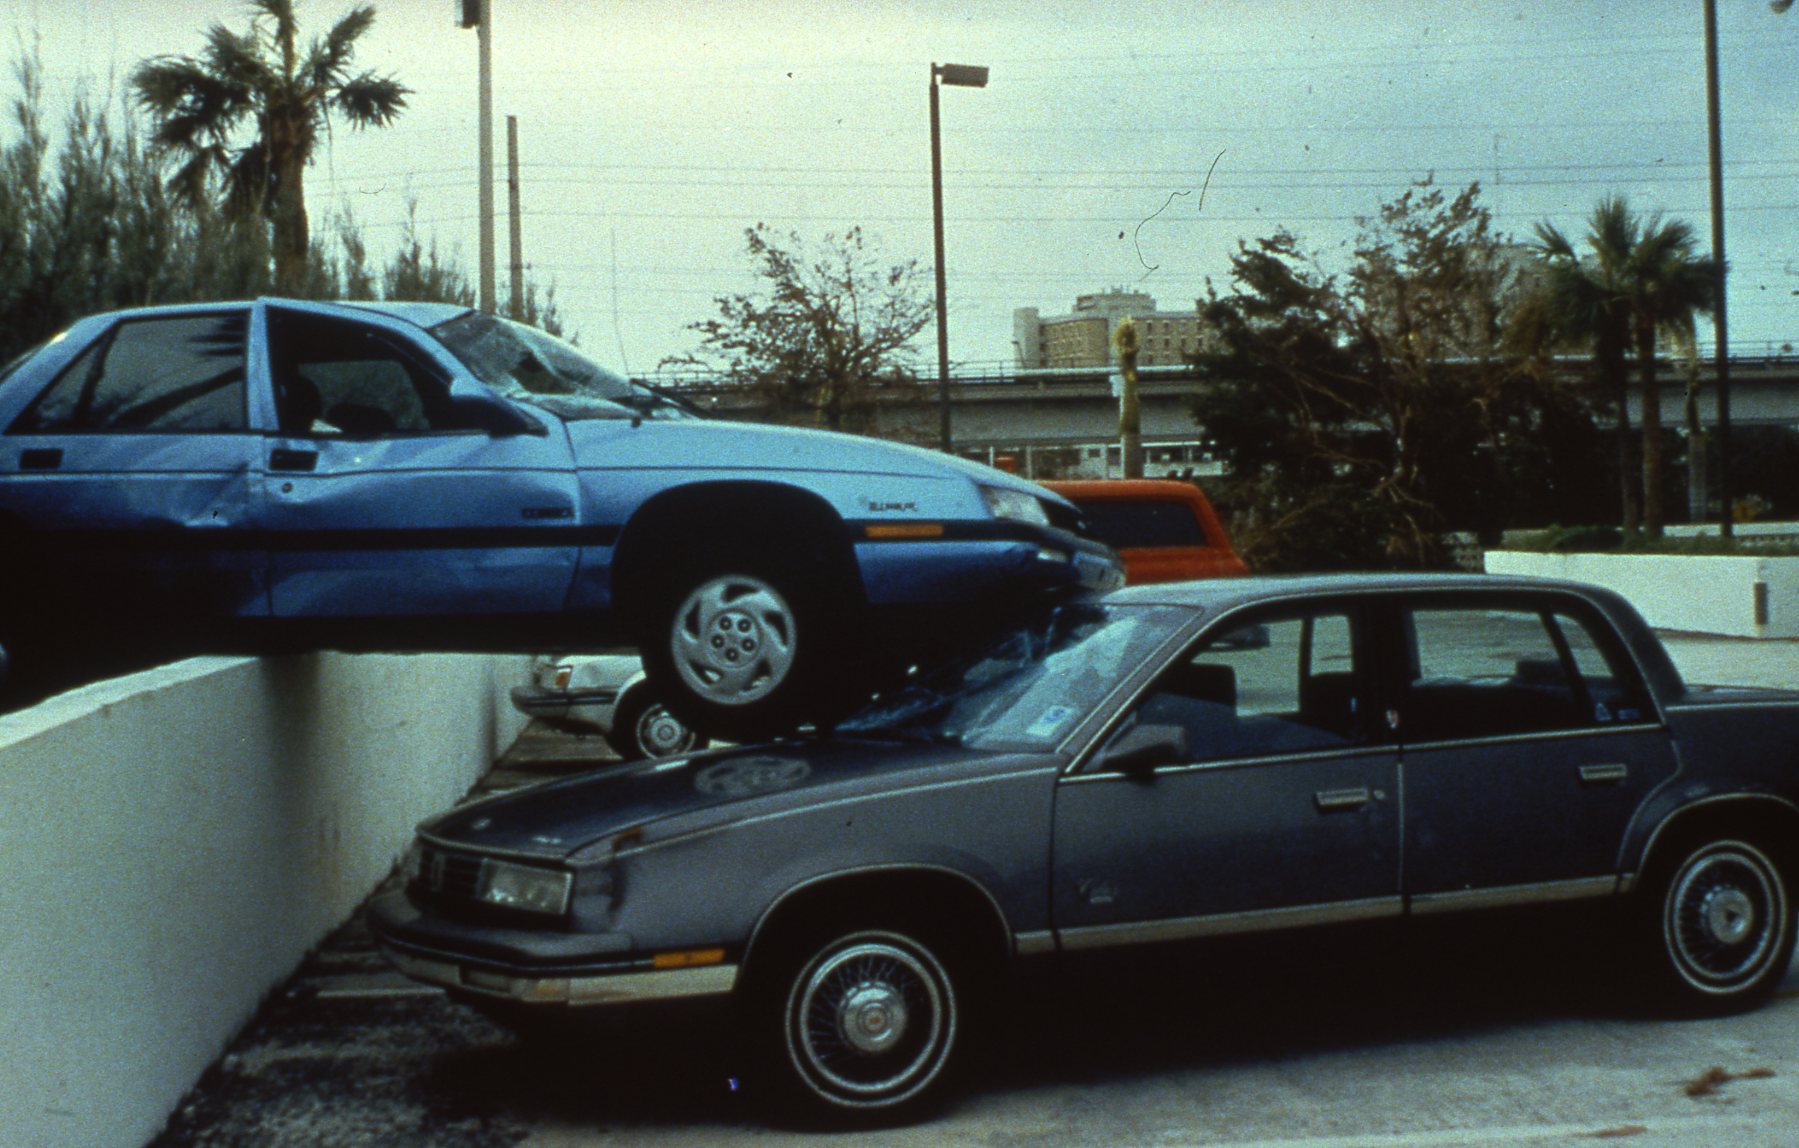 Picture of the vehicle outside in the parking lot of the old NHC building in Coral Gables. Picture courtesy of NOAA. [IMAGE]